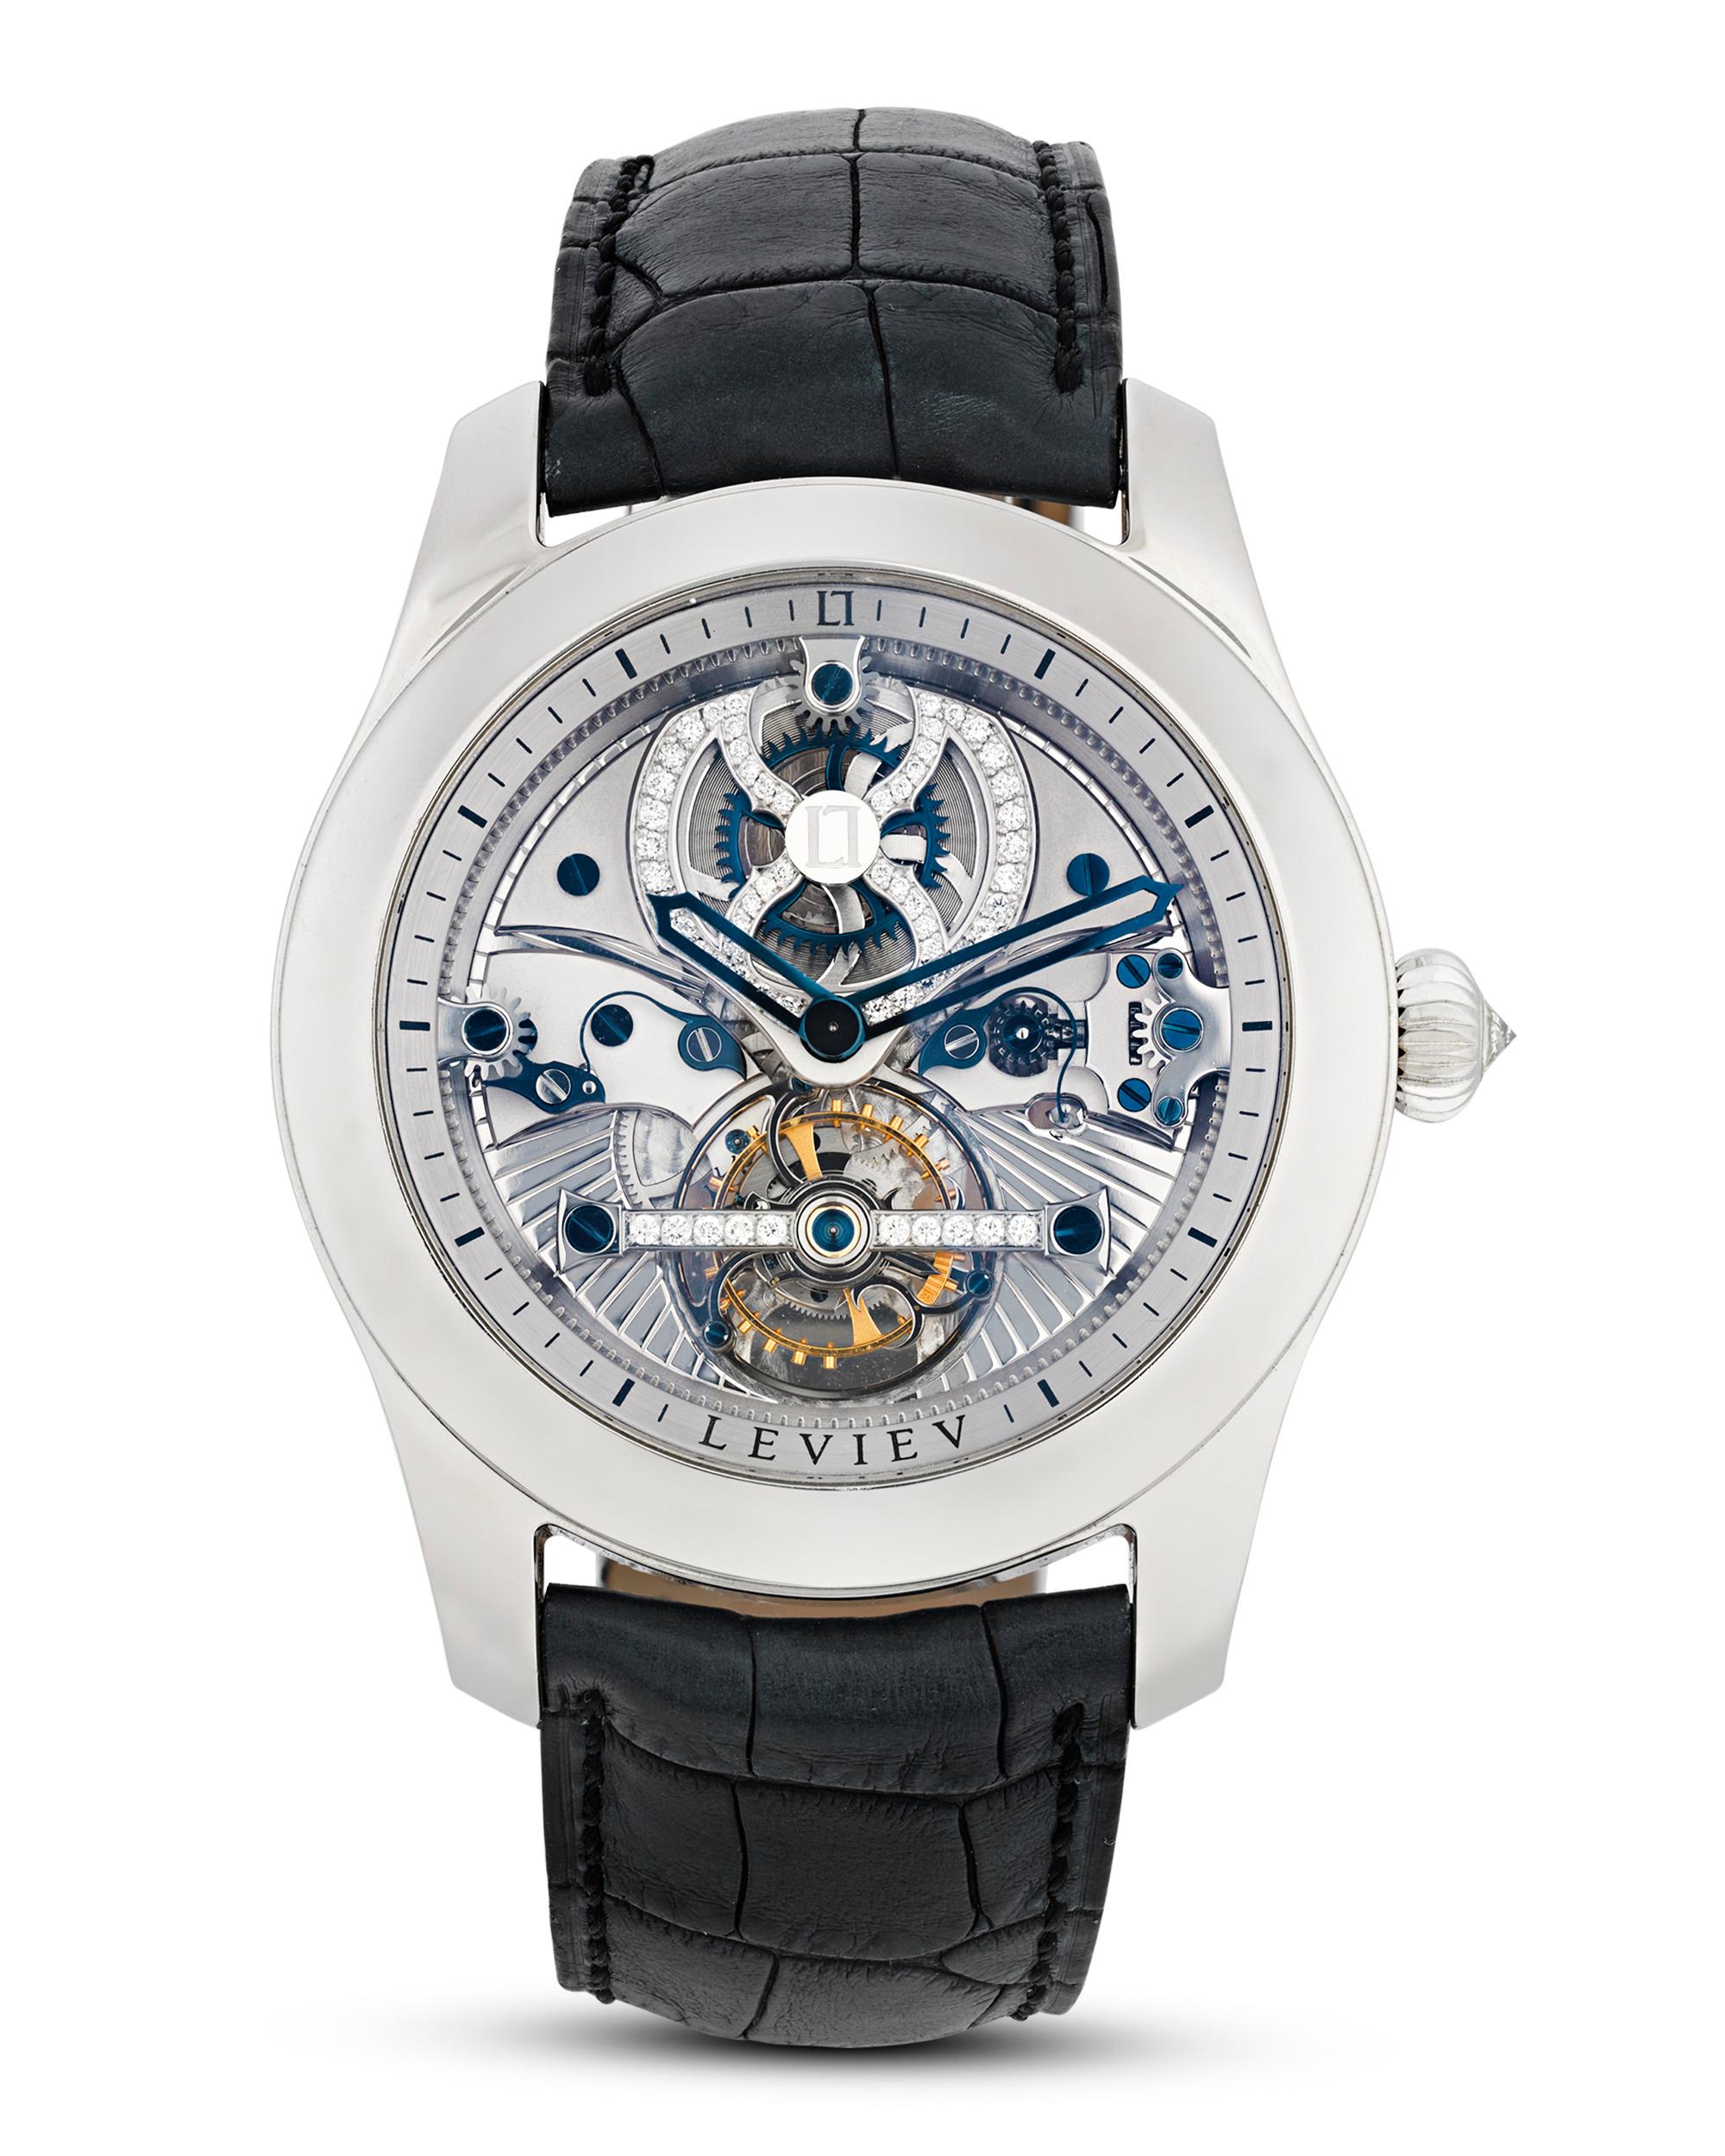 This exceptionally rare luxury wristwatch by Leviev contains a tourbillon movement, one of the most complex and highly coveted mechanical movements to be found. Invented in 1795 by the famed watchmaker Abraham-Louis Breguet, the tourbillon was